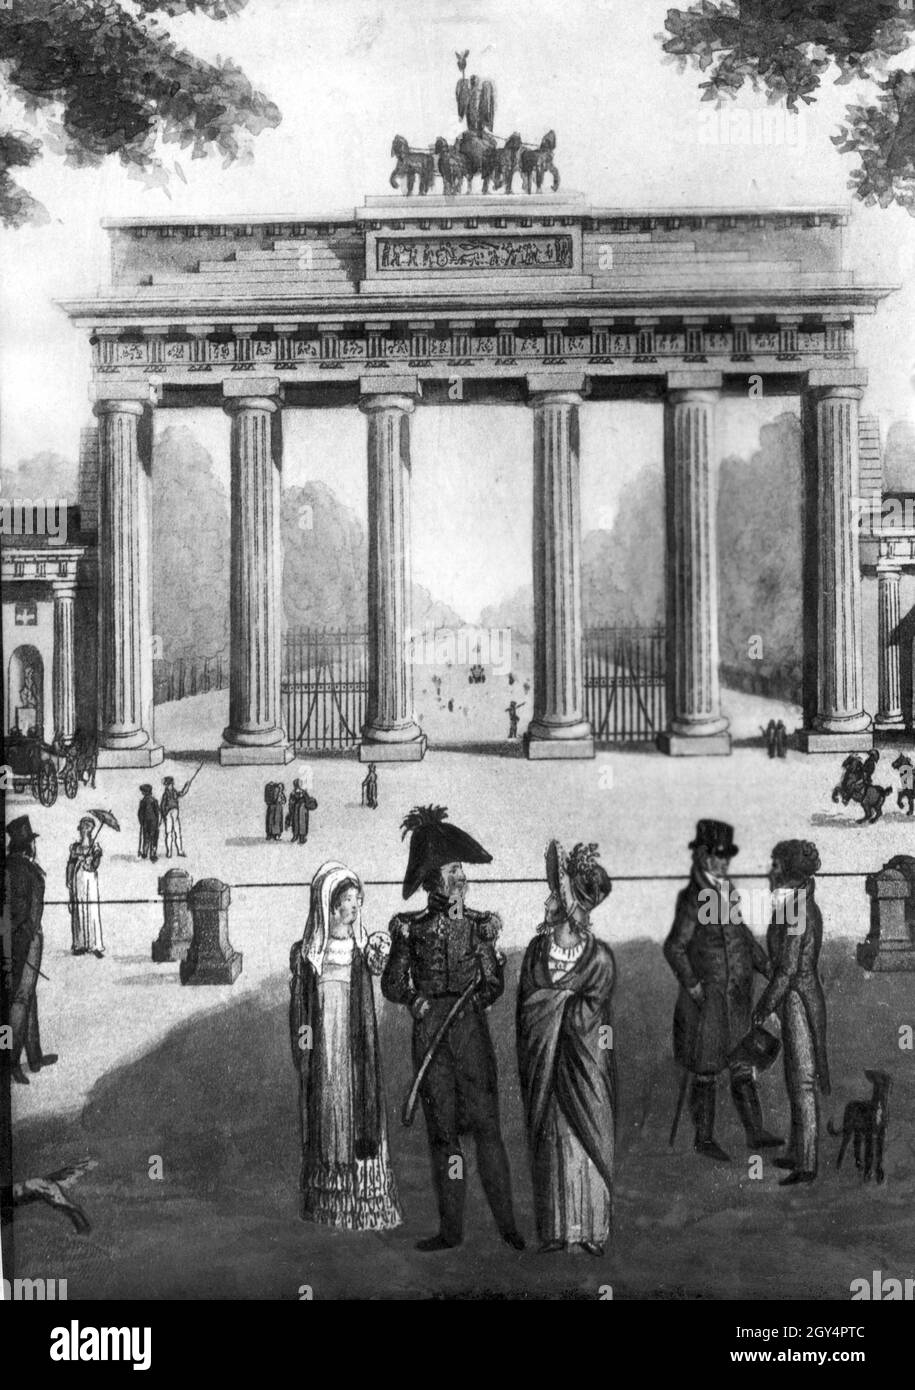 This painting by Friedrich August Calau shows the Brandenburg Gate in Berlin around the year 1825. [automated translation] Stock Photo